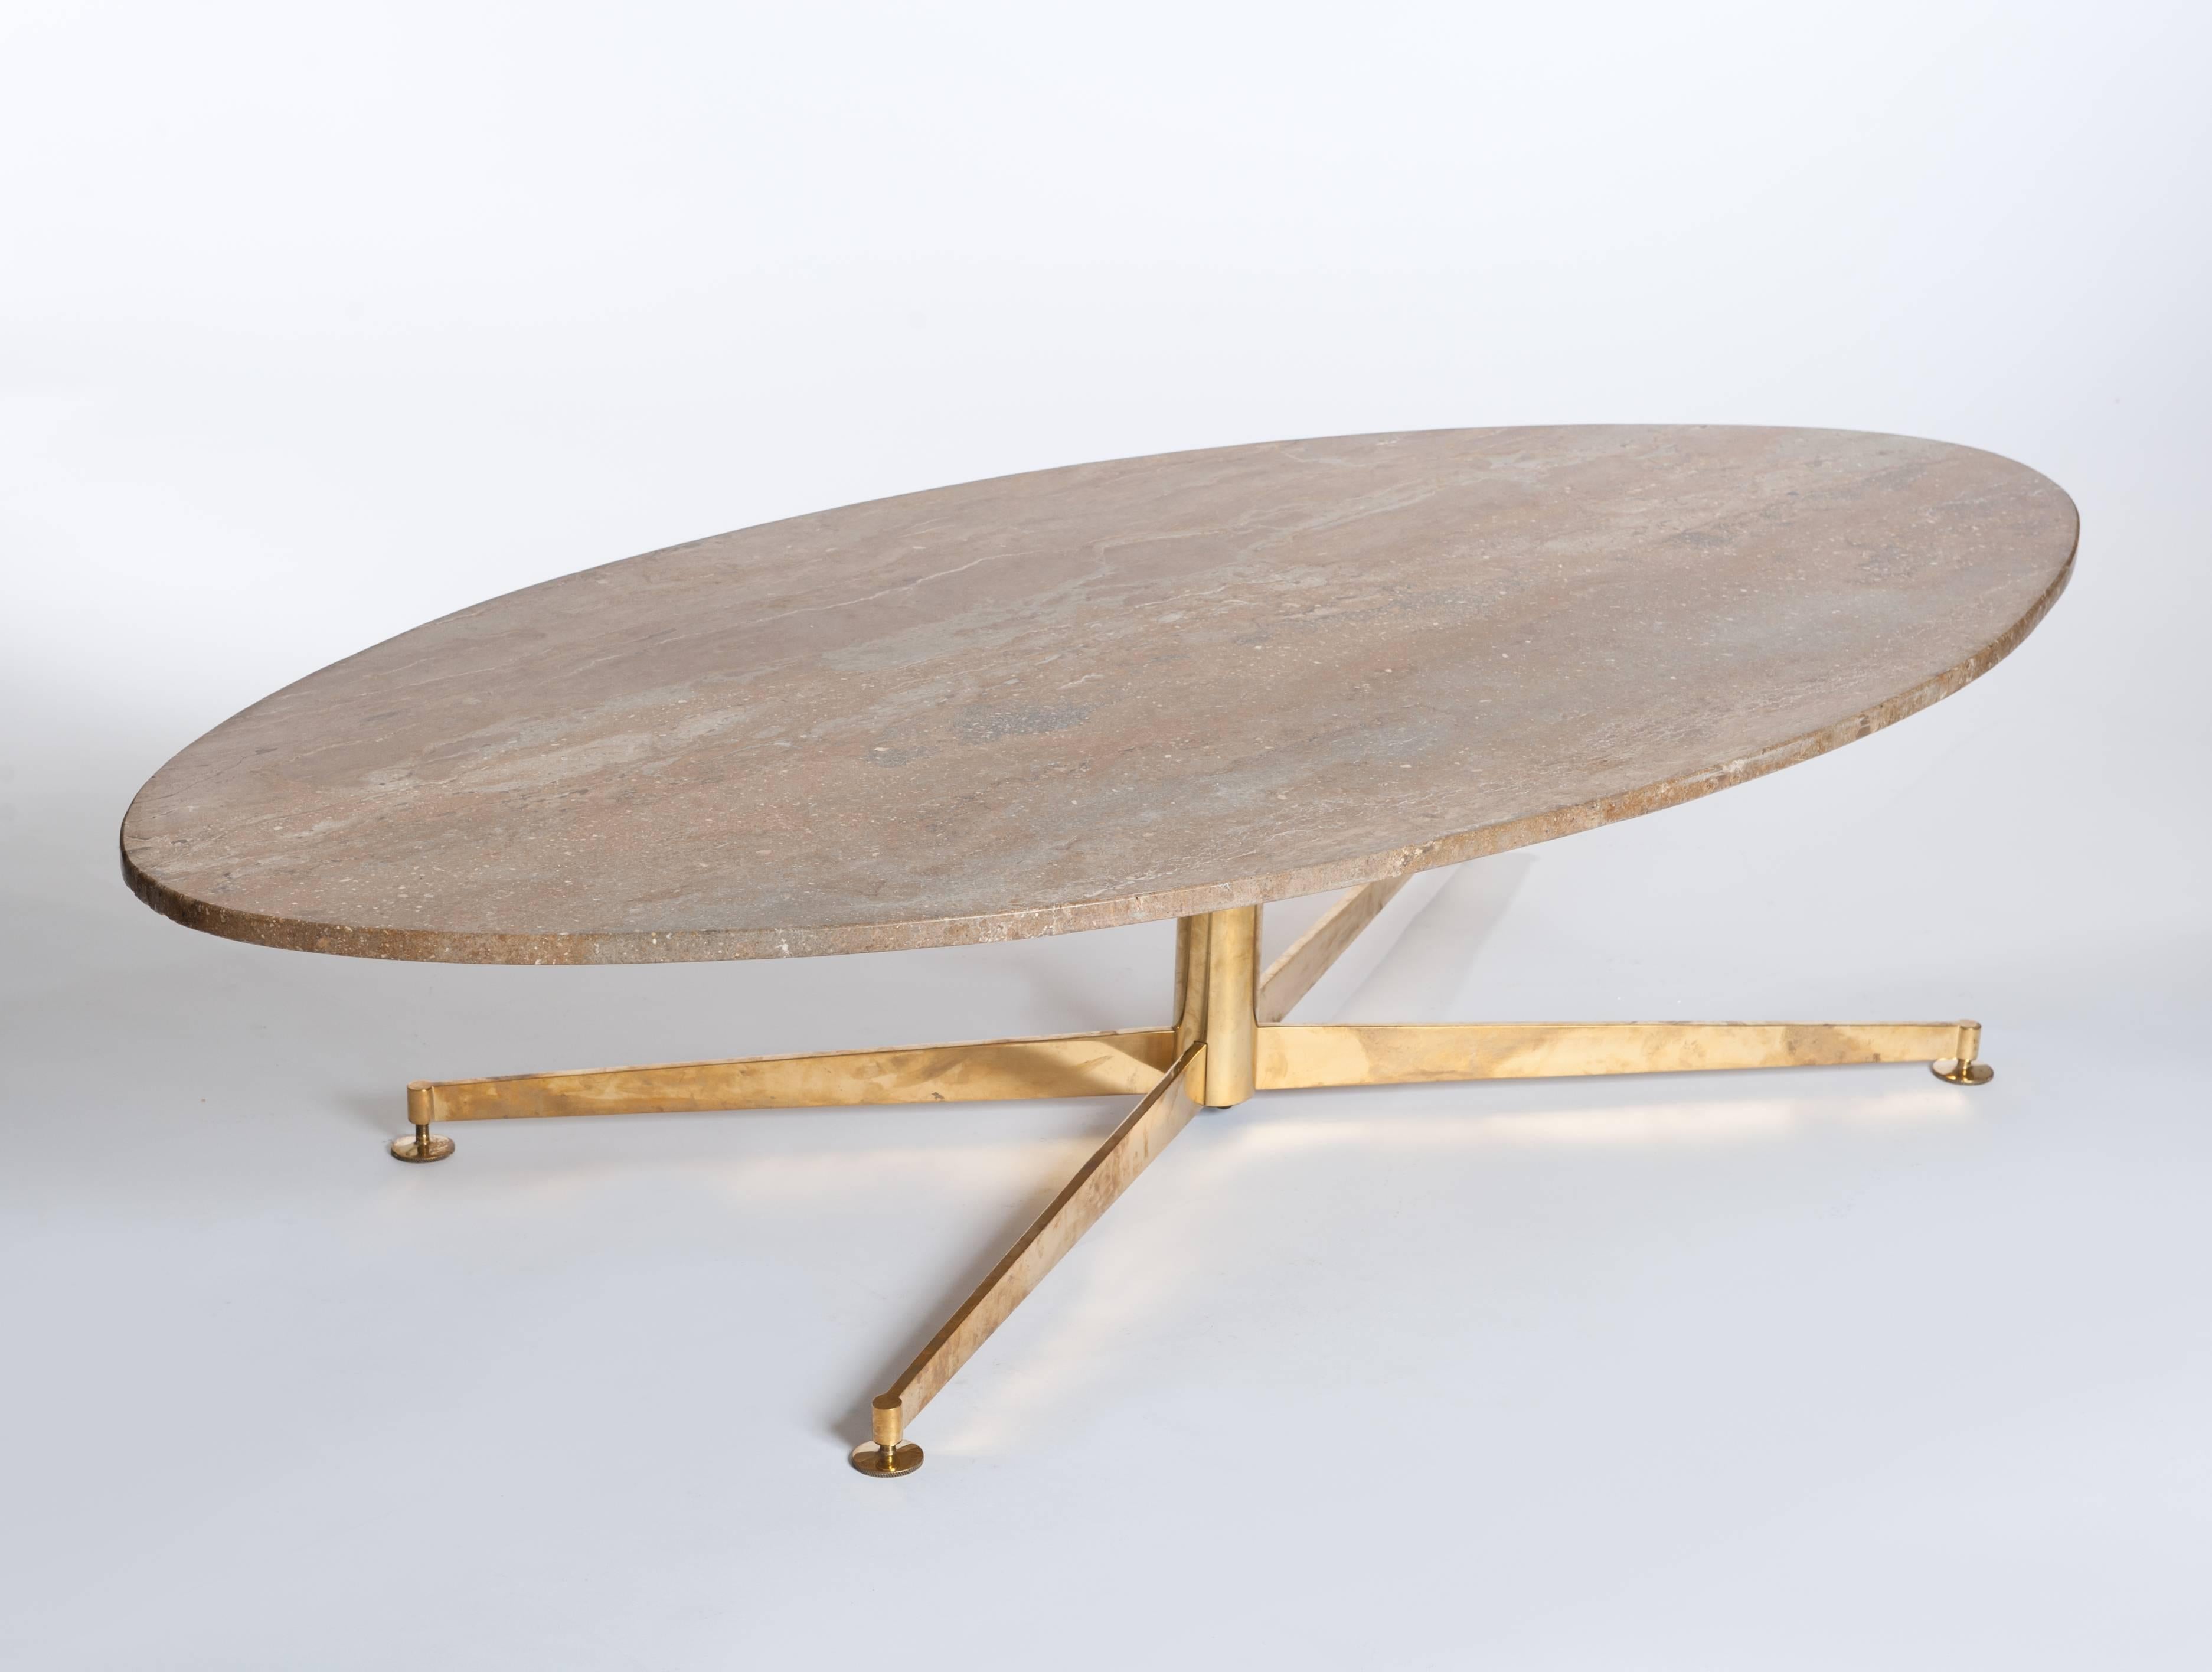 Elegant X-shaped solid brass Stand (feet ends are adjustable in height) 
with an oval travertine tabletop in colorful marbleization.
Measurements of tabletop: 163 cm x 82 cm x 2 cm
Measurements of stand: 104 cm x 60 cm x 35 cm.